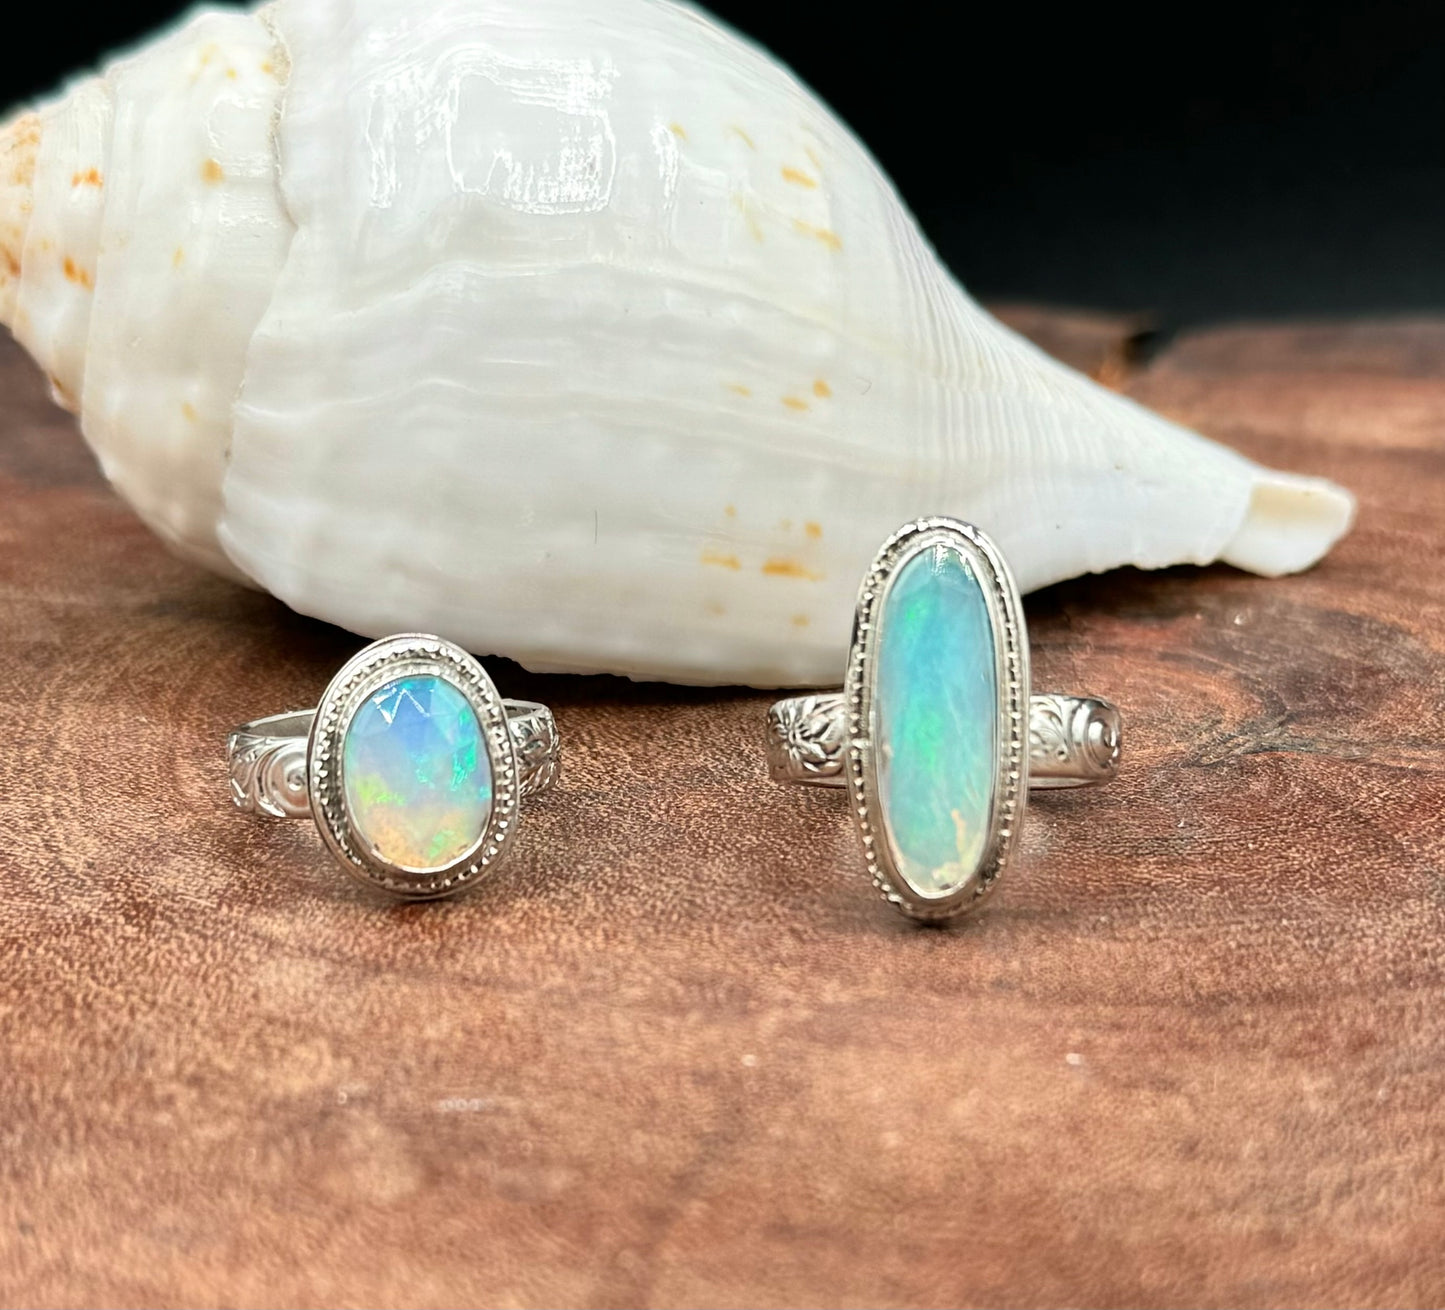 Sterling Silver Patterned Opal Ring